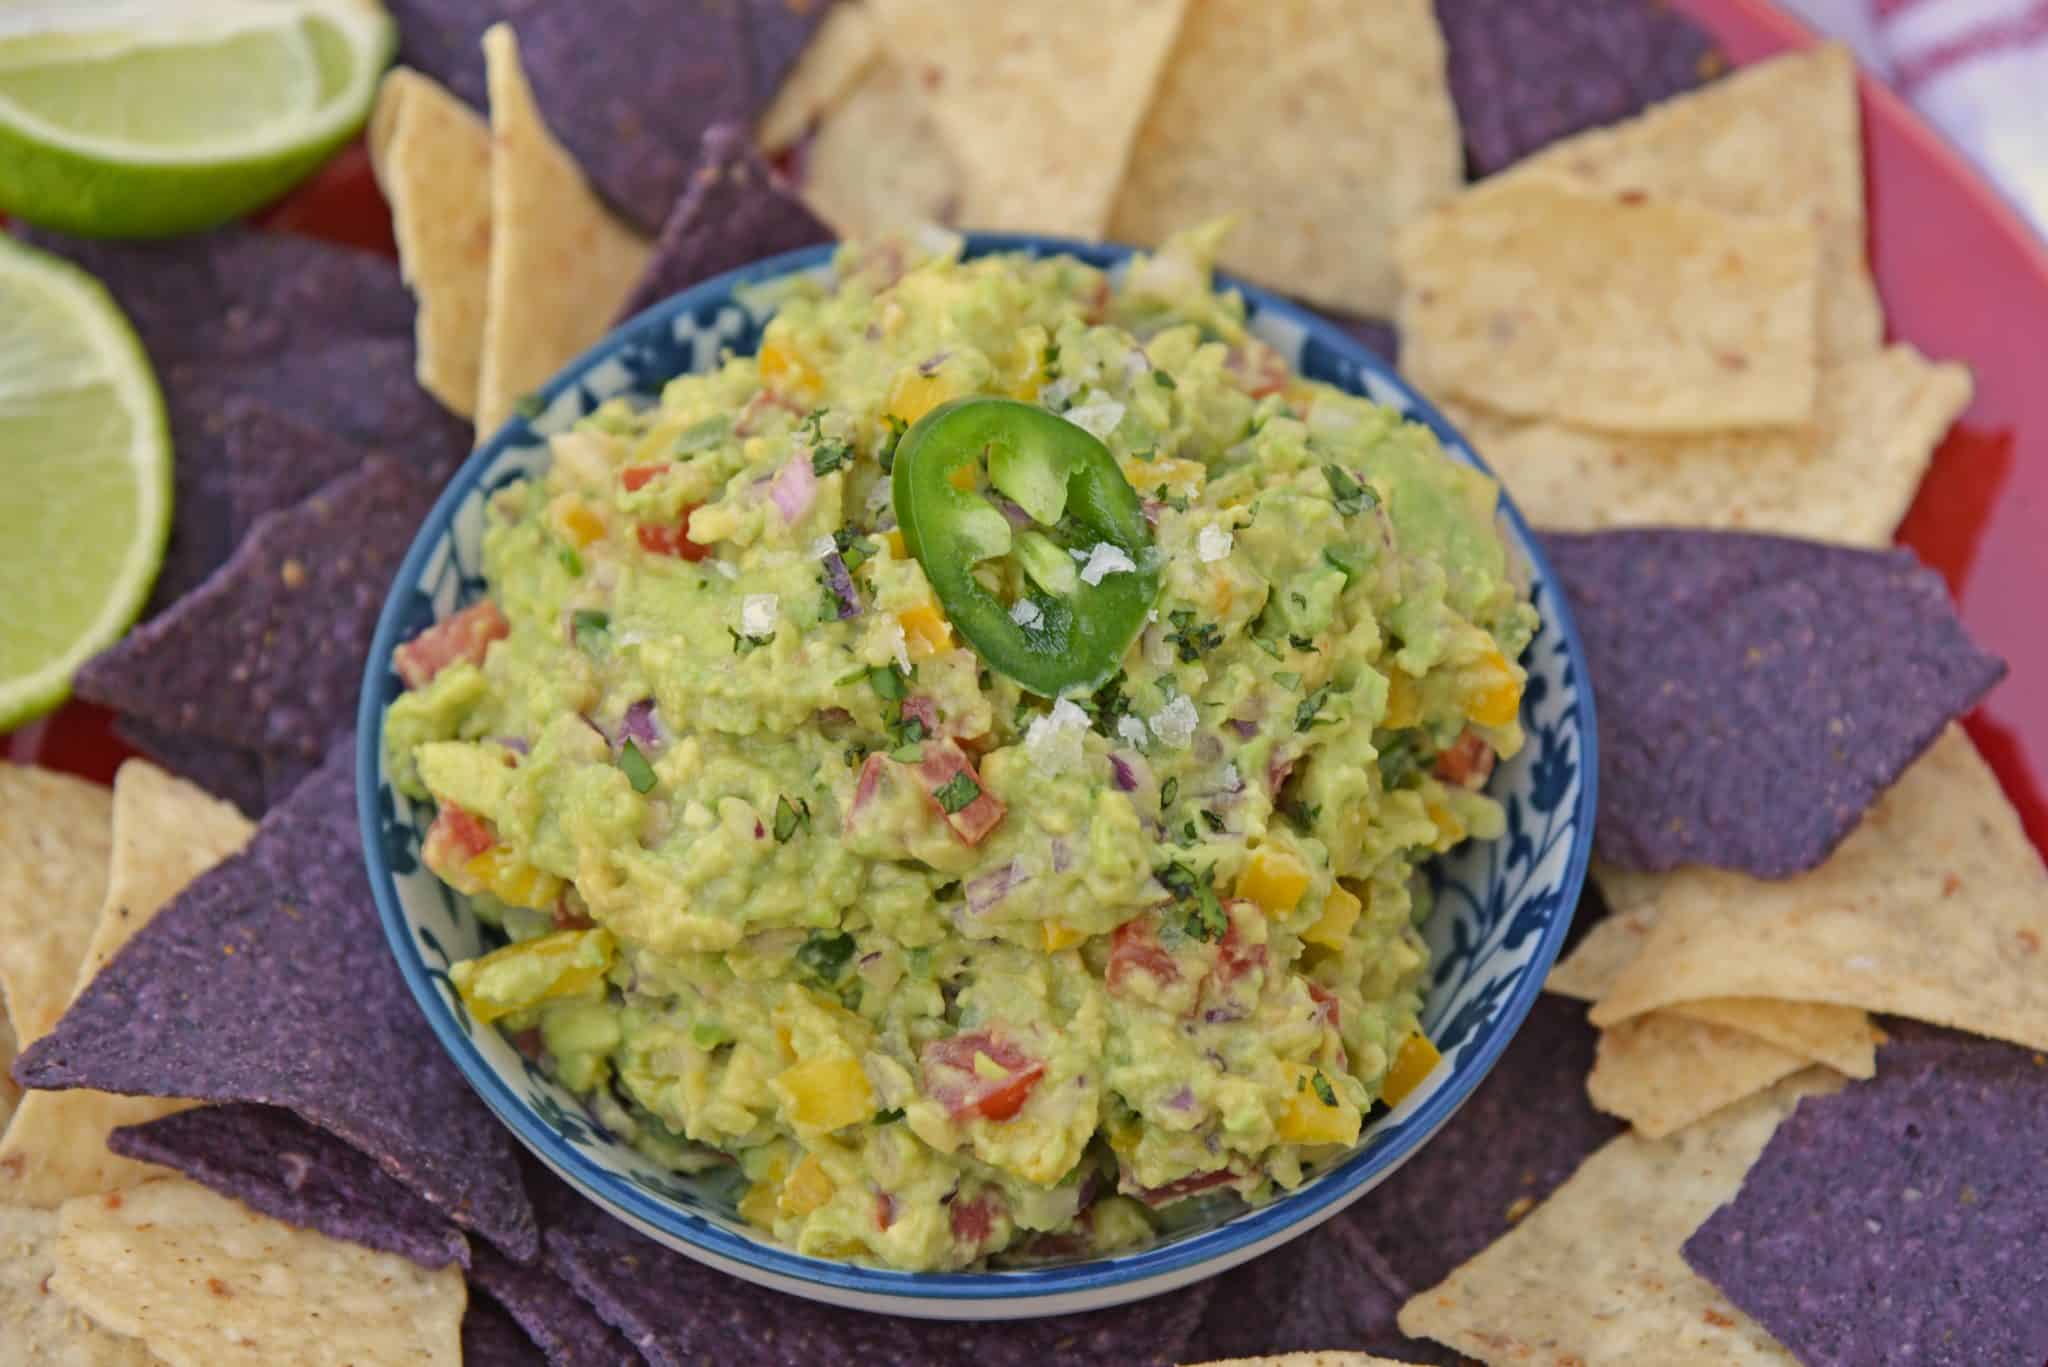 This Homemade Guacamole is one of the Best Guacamole Recipe you'll find! It's an easy guacamole recipe that is perfect for pairing with chips, fish, chicken, beef, salad or any food that needs a little pick-me-up! #bestguacamolerecipe #easyguacamolerecipe #homemadeguacamole www.savoryexperiments.com